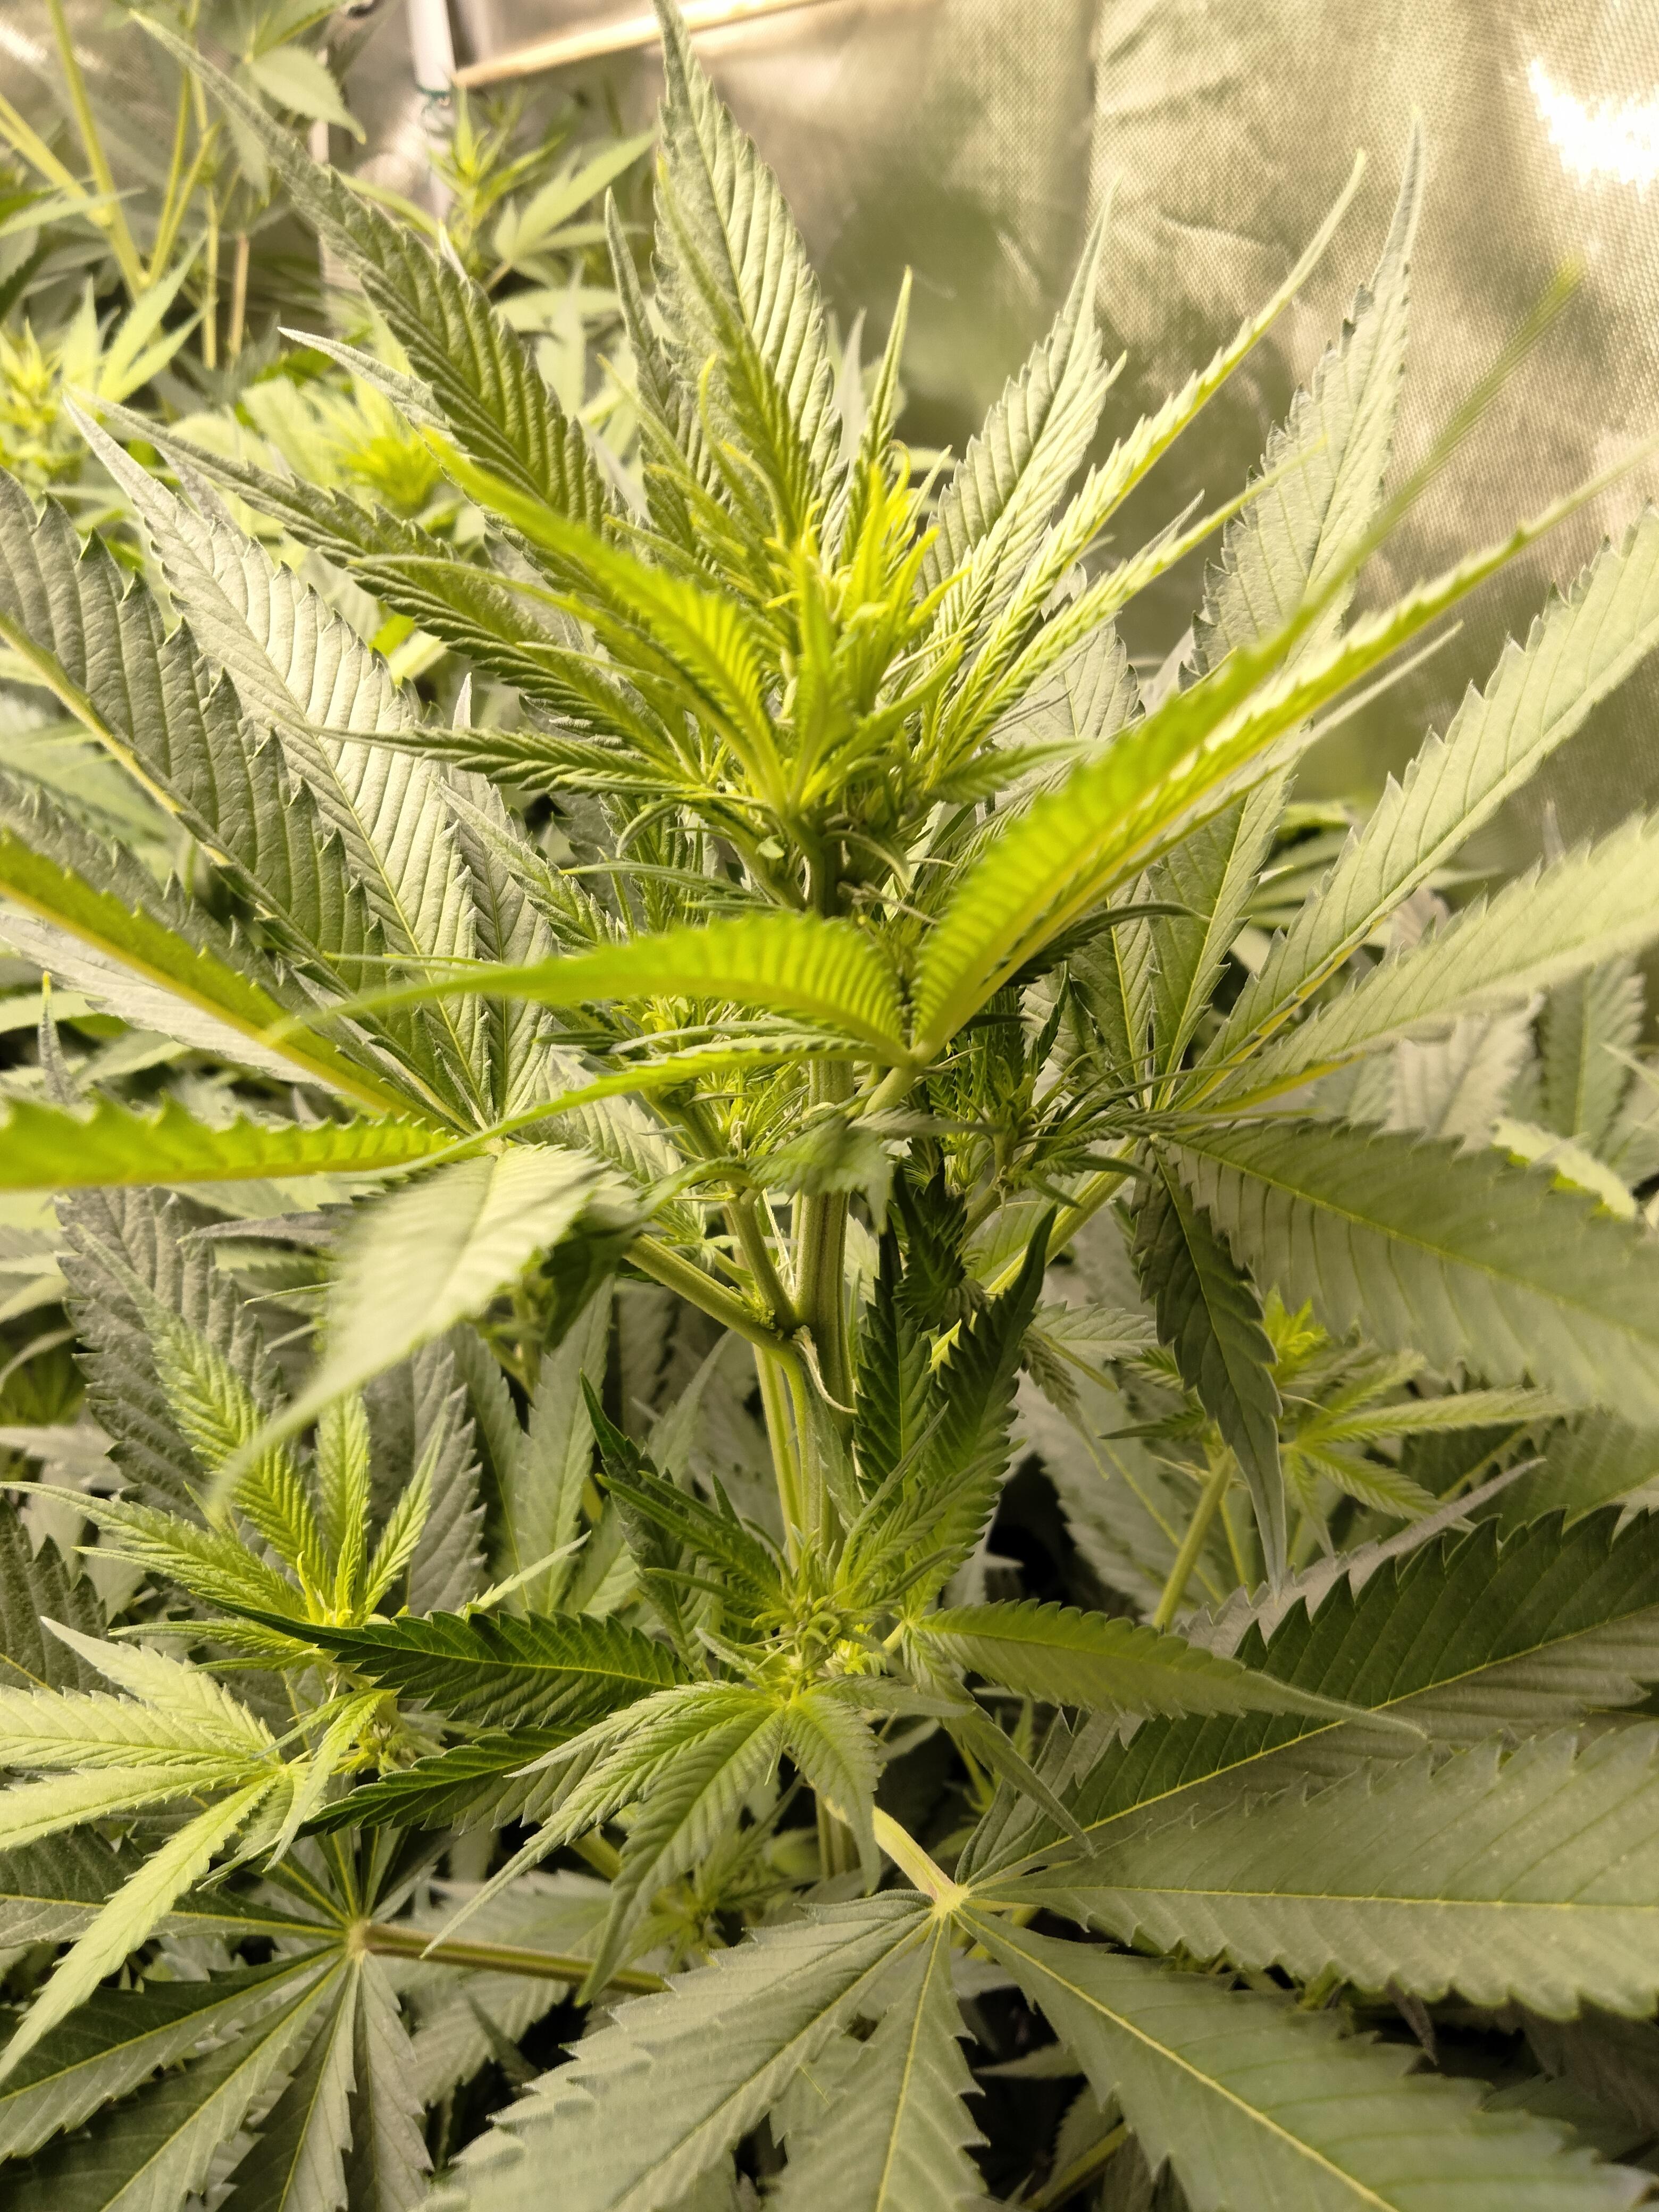 sk#1 buds forming